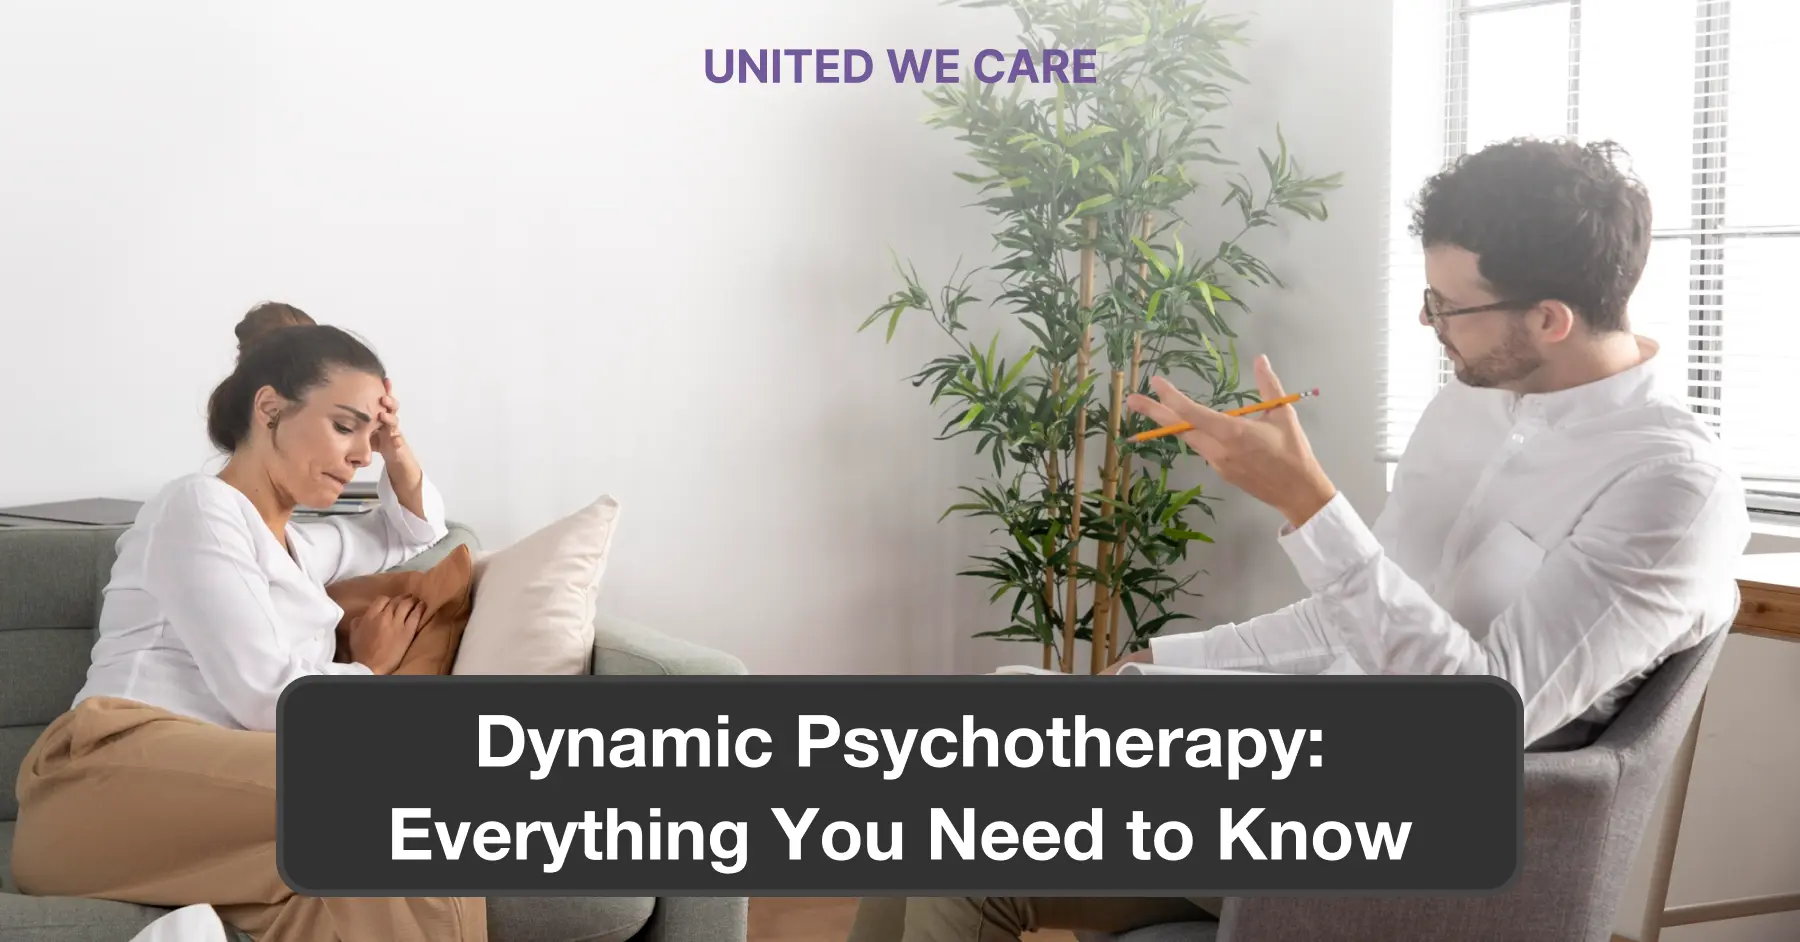 Psychotherapy: Everything You Need to Know